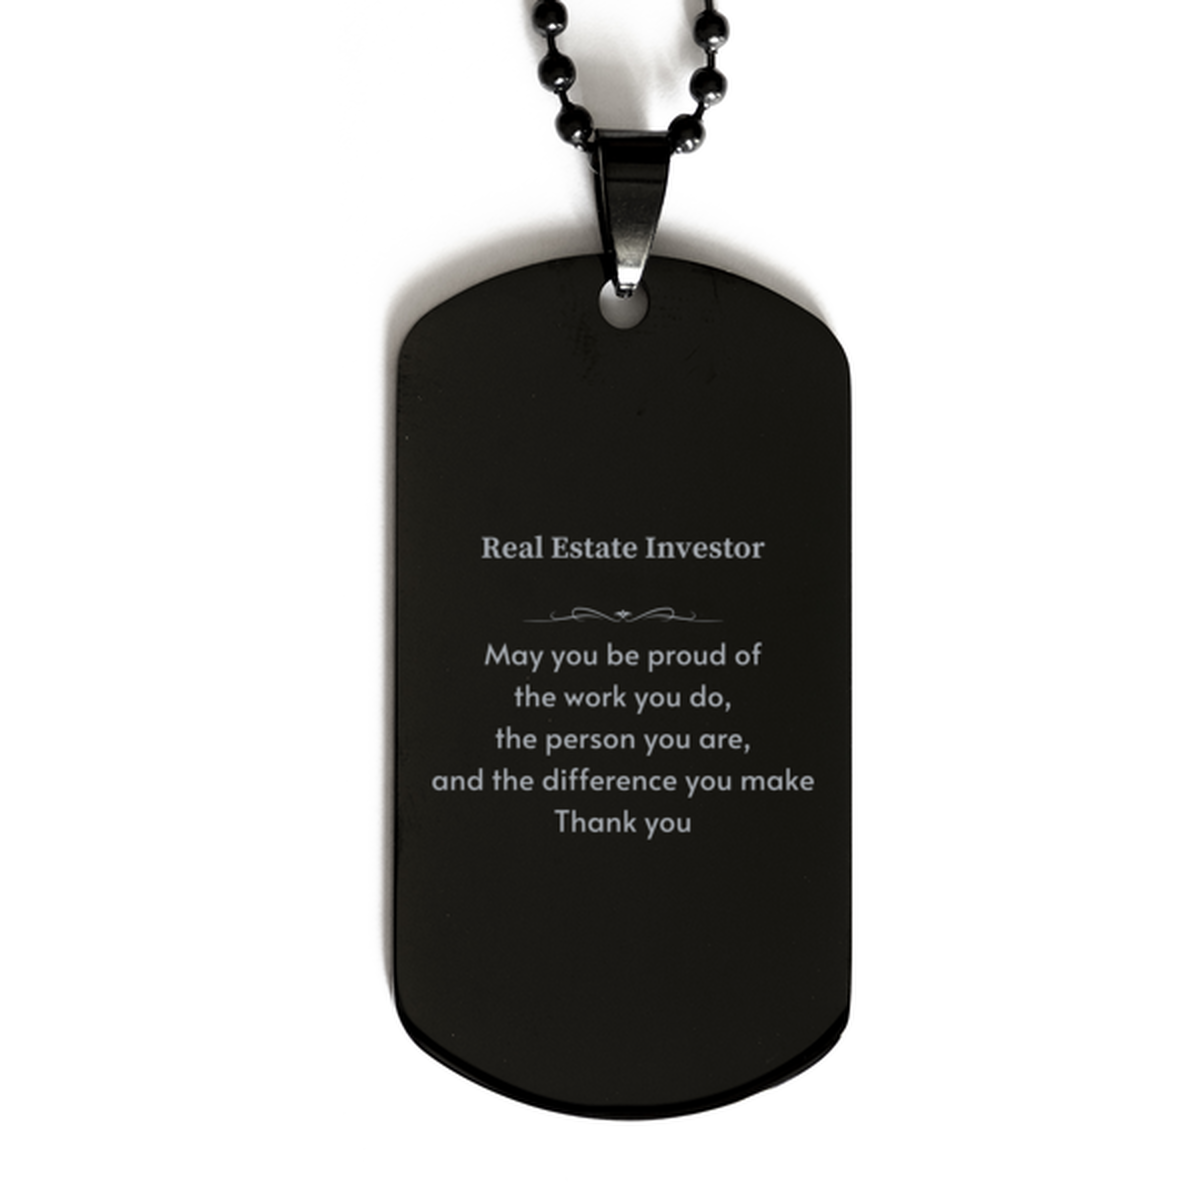 Heartwarming Black Dog Tag Retirement Coworkers Gifts for Real Estate Investor, Real Estate Investor May You be proud of the work you do, the person you are Gifts for Boss Men Women Friends